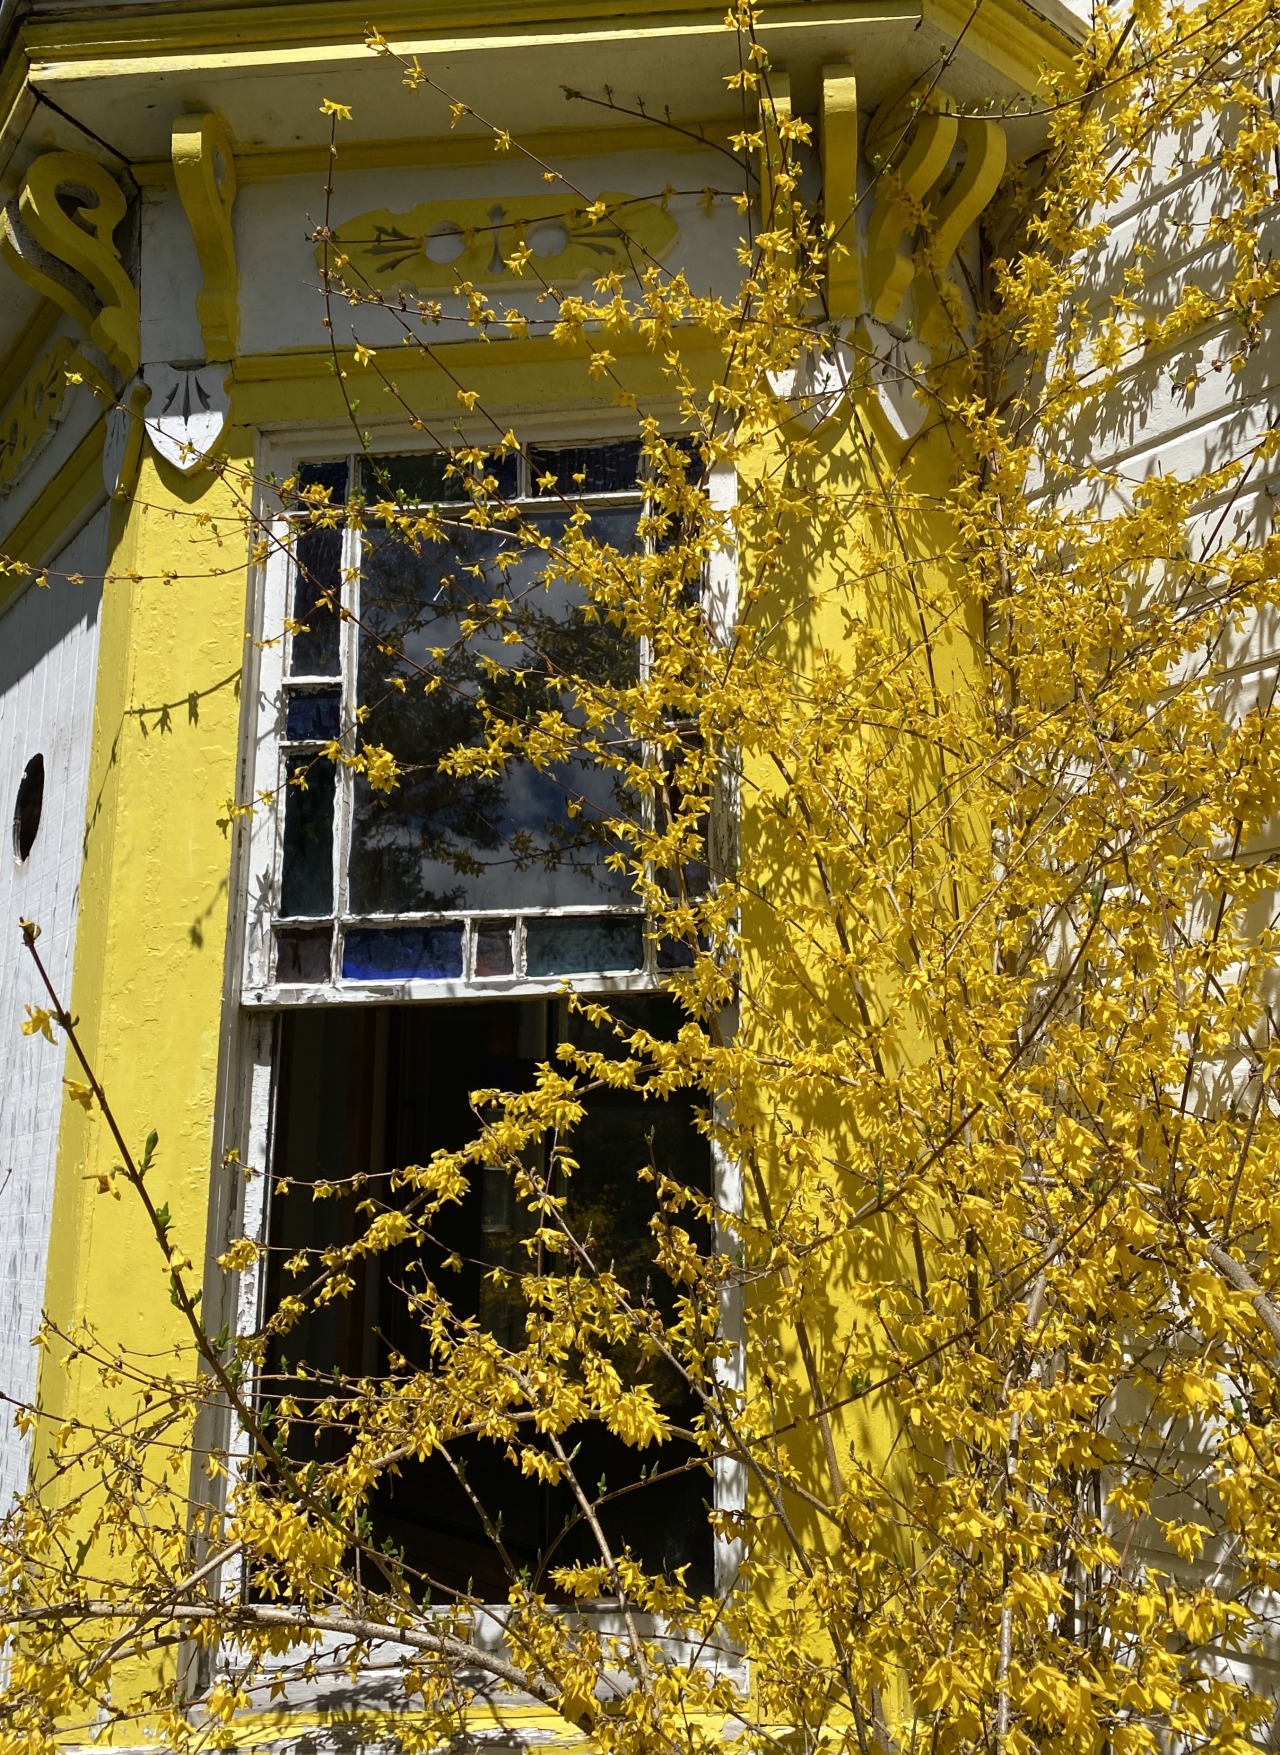 Upstate NY. Old abandoned hotel with forsythia, 2021 #abandoned buildings#abandoned#stained glass#forsythia #stained glass window #window#yellow#spring #upstate new york #stamford ny#my photo#original content#flowers